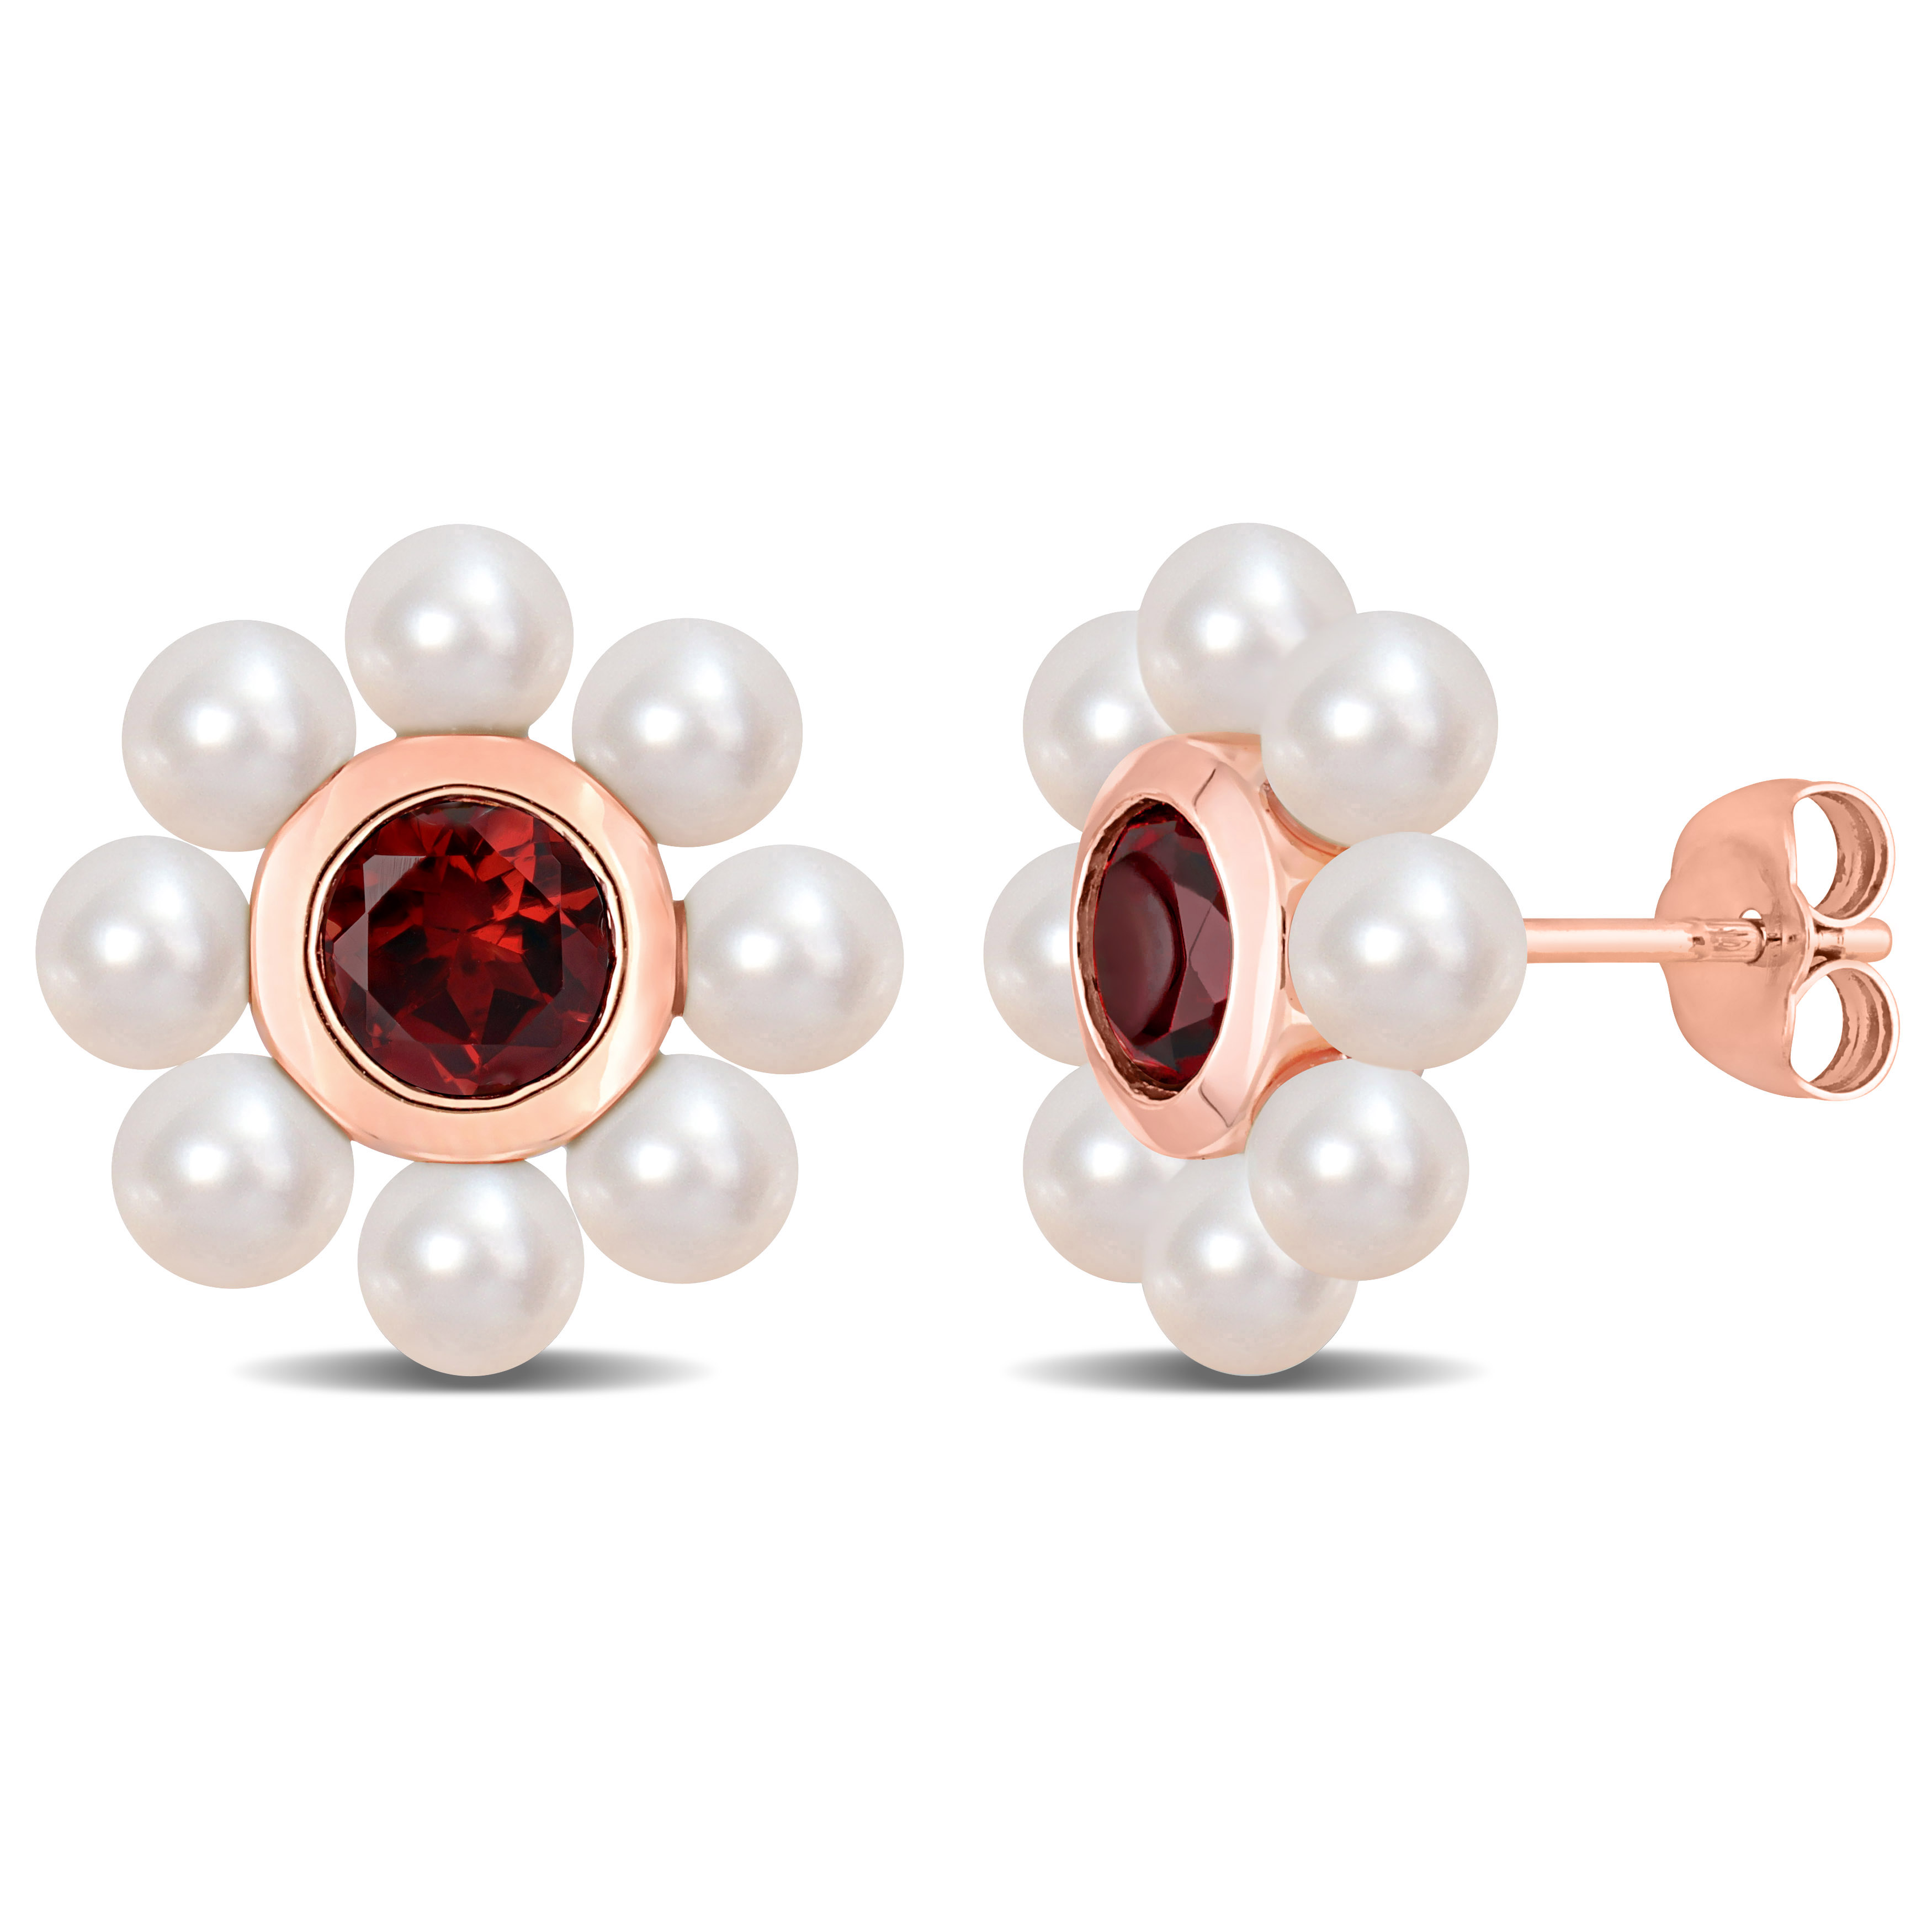 3.5-4 MM Freshwater Cultured Pearl and 1 1/5 CT TGW Garnet Floral Stud Earrings in 10k Rose Gold